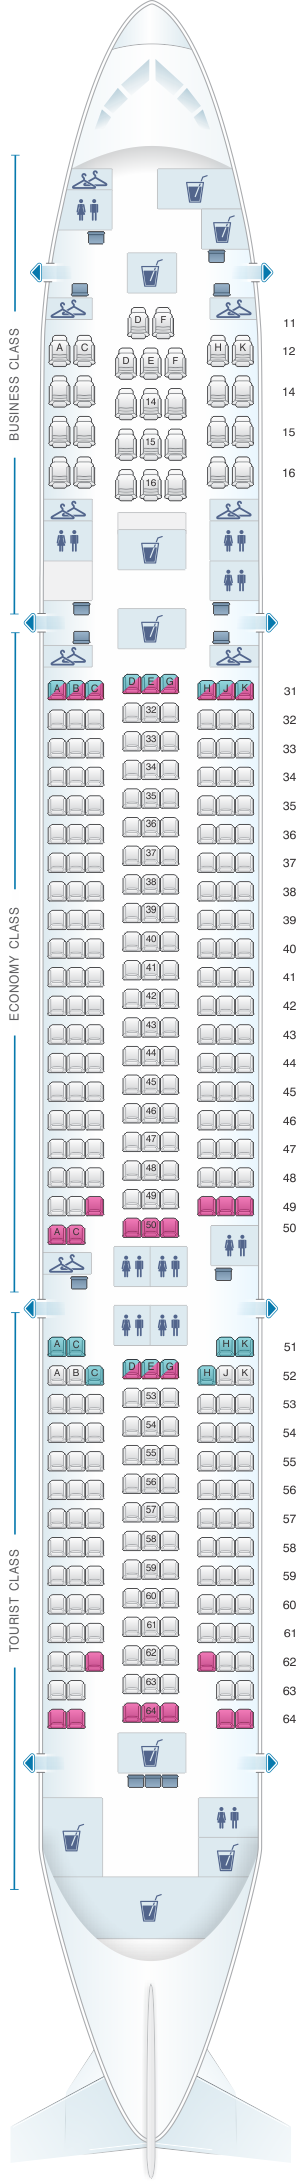 Seat map for Transaero Airlines Boeing B777 200 Config. 1